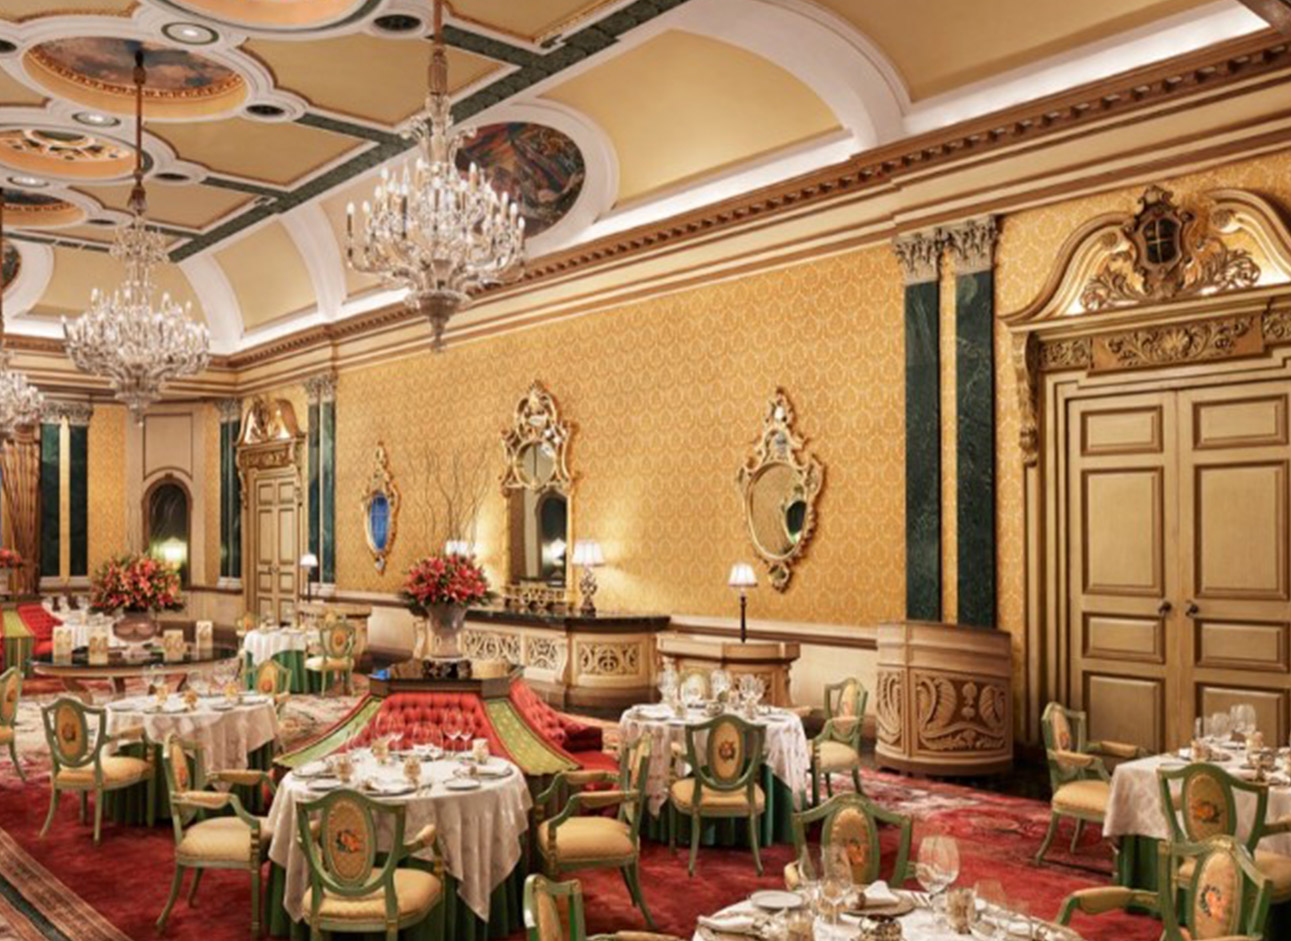 The Royal Dining - Indulge in exquisite dining experiences fit for royalty